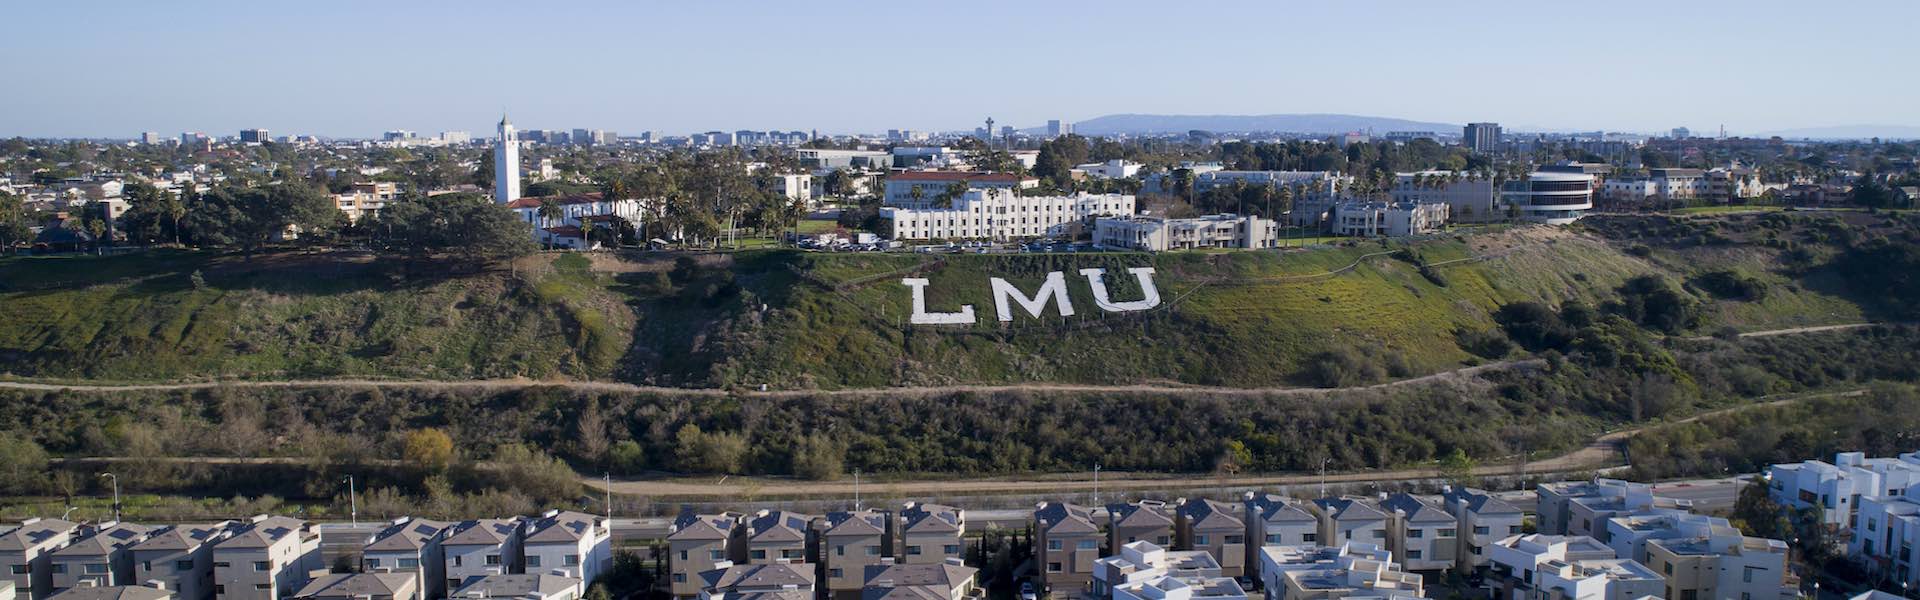 Aerial image of the LMU bluff